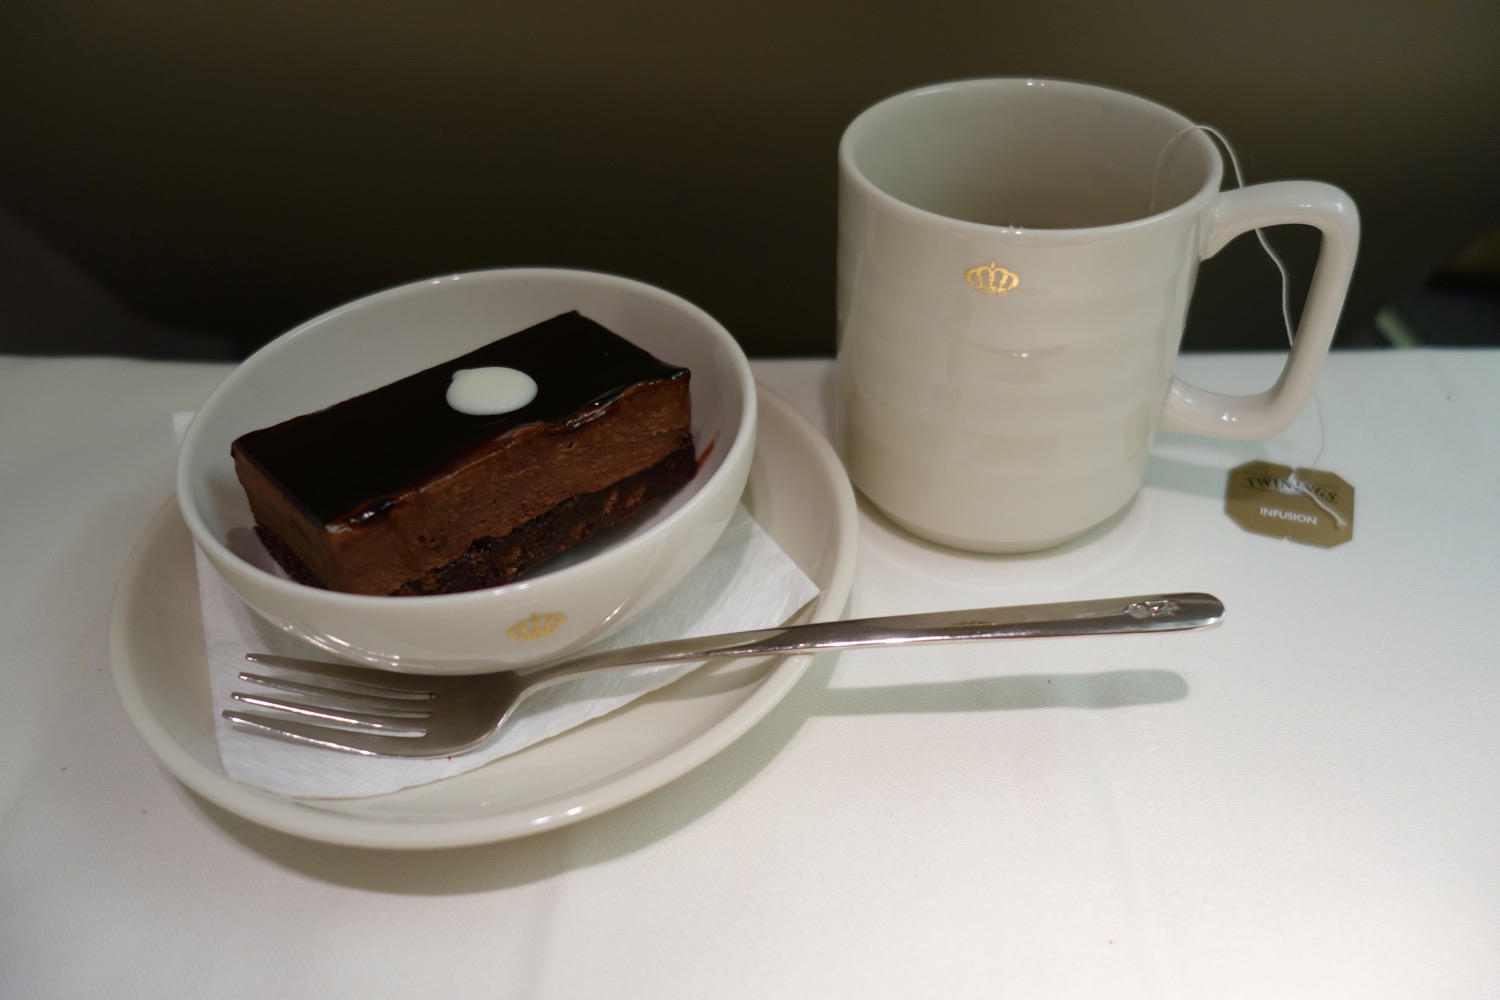 a plate with a piece of cake and a cup of tea